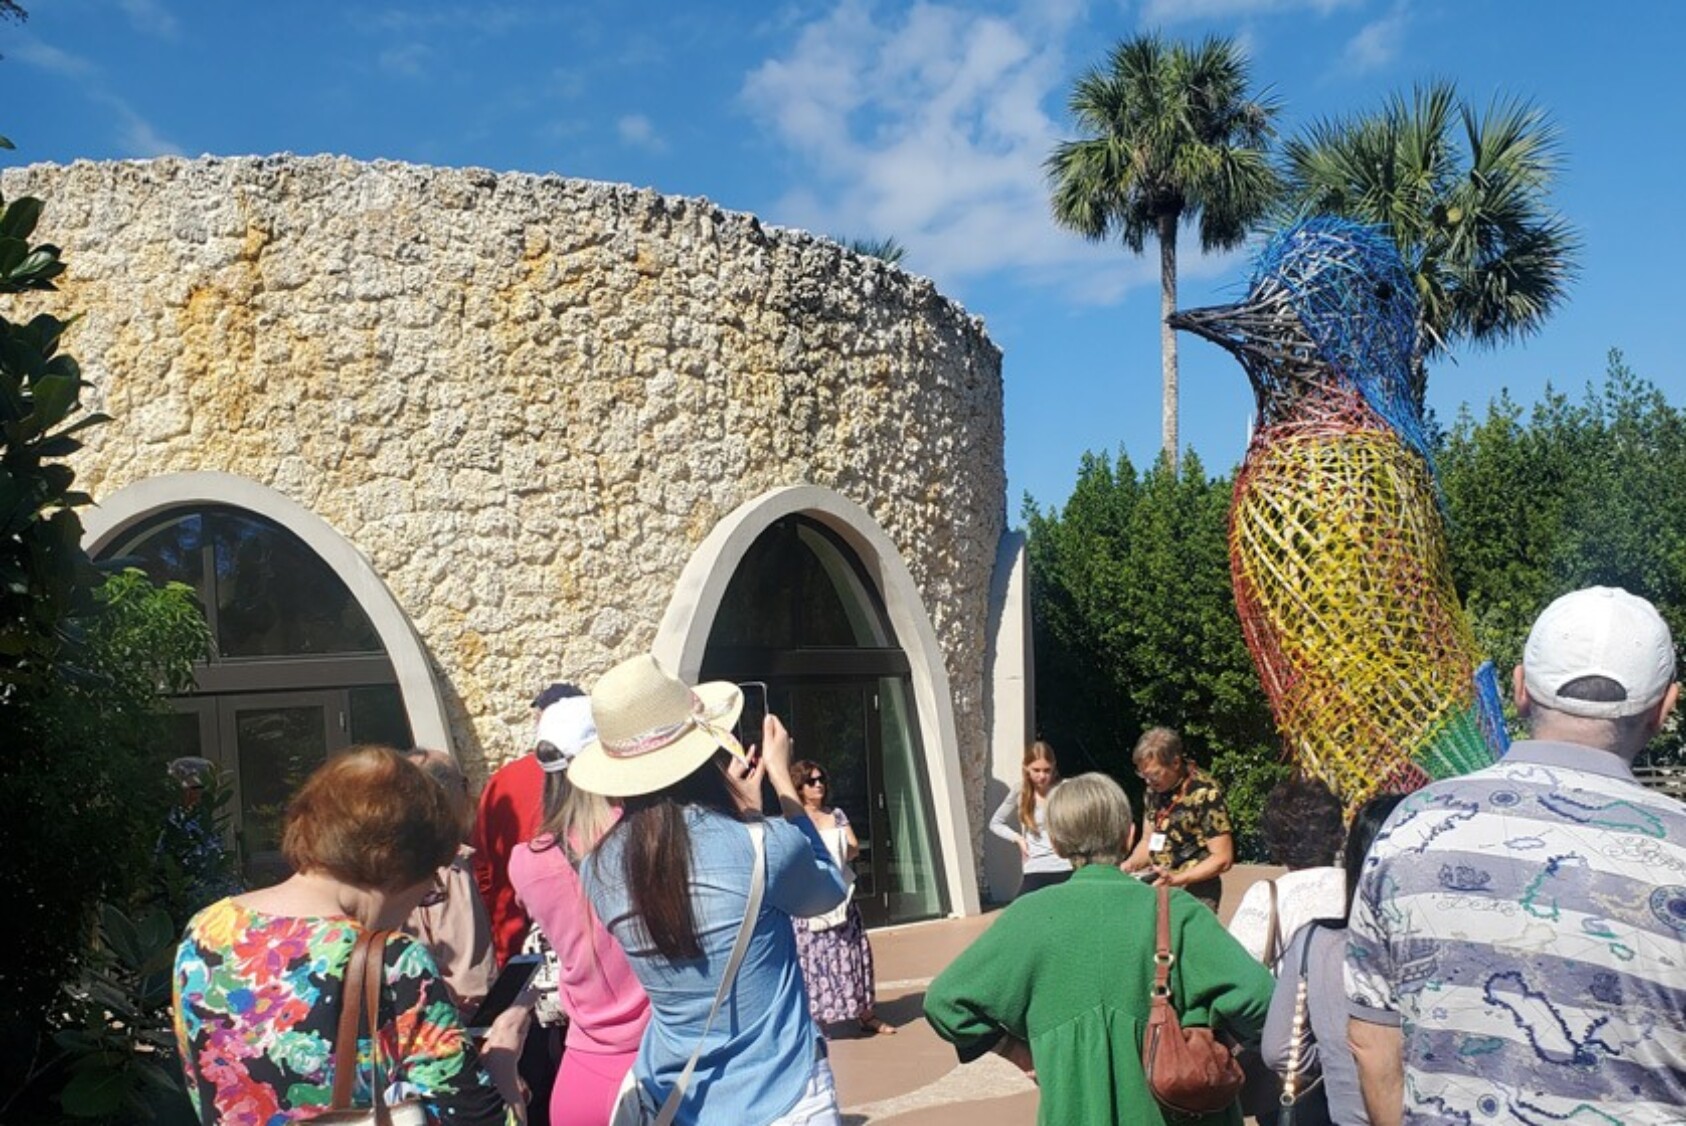 Event attendees view “Sietecolores” (Seven Colors), a sculpture of a painted bunting celebrating Miami’s first Hispanic Mayor, Maurice A. Ferré.